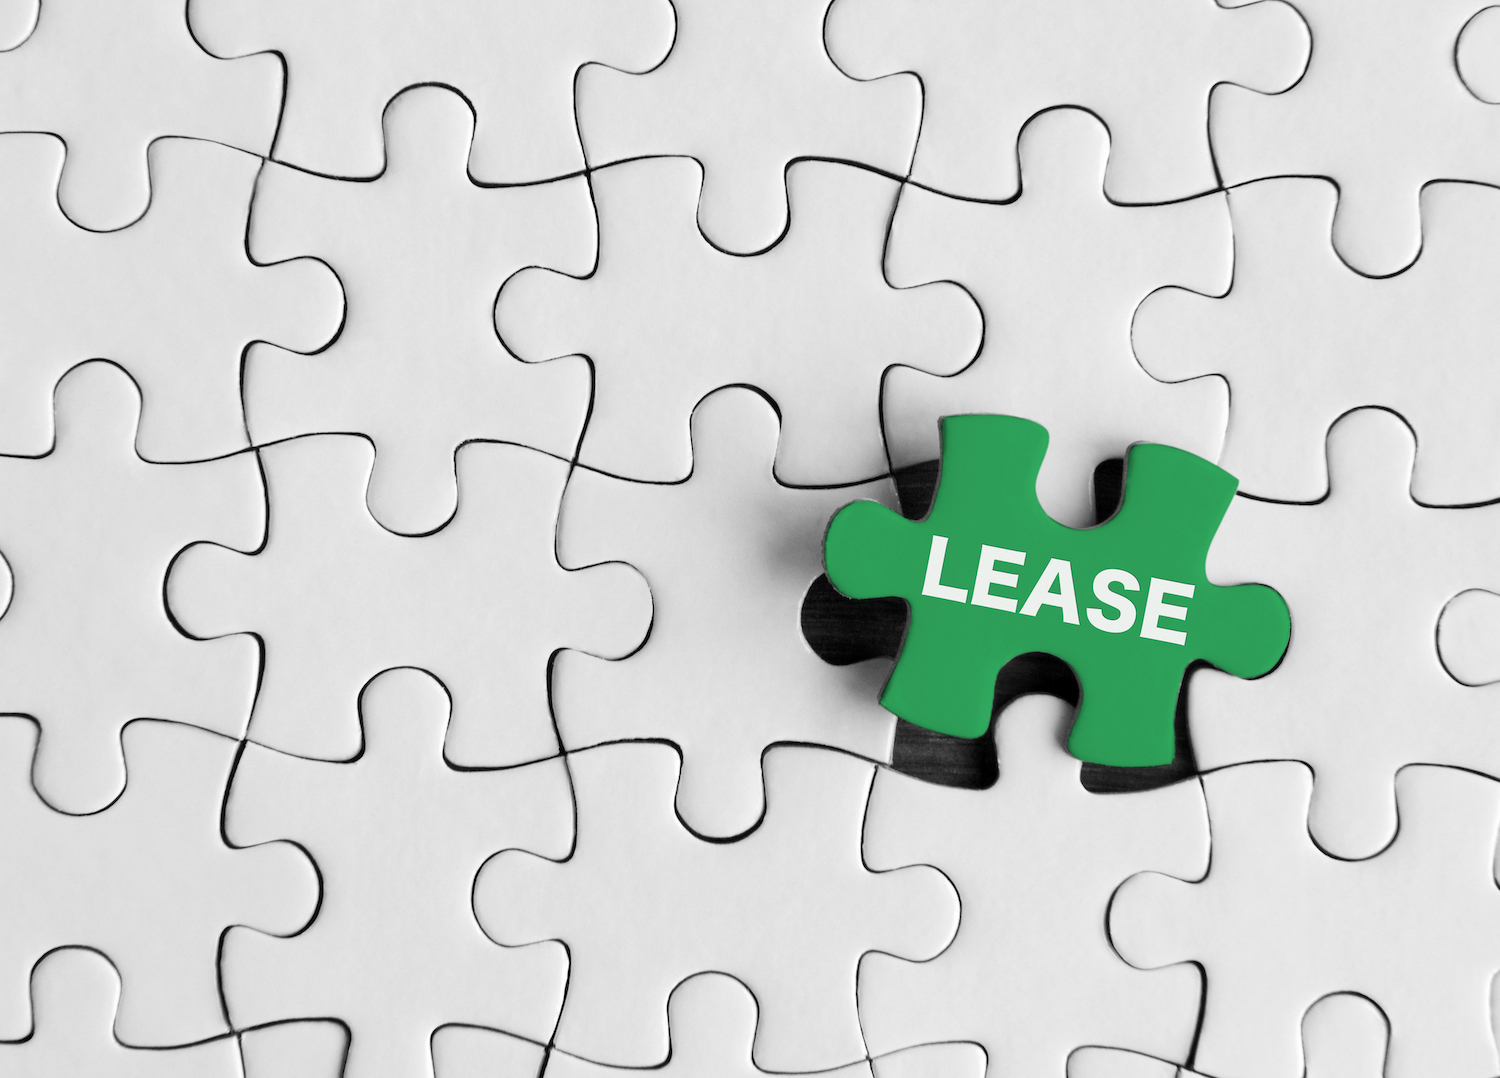 Puzzle pieces with word 'Leaseâ.